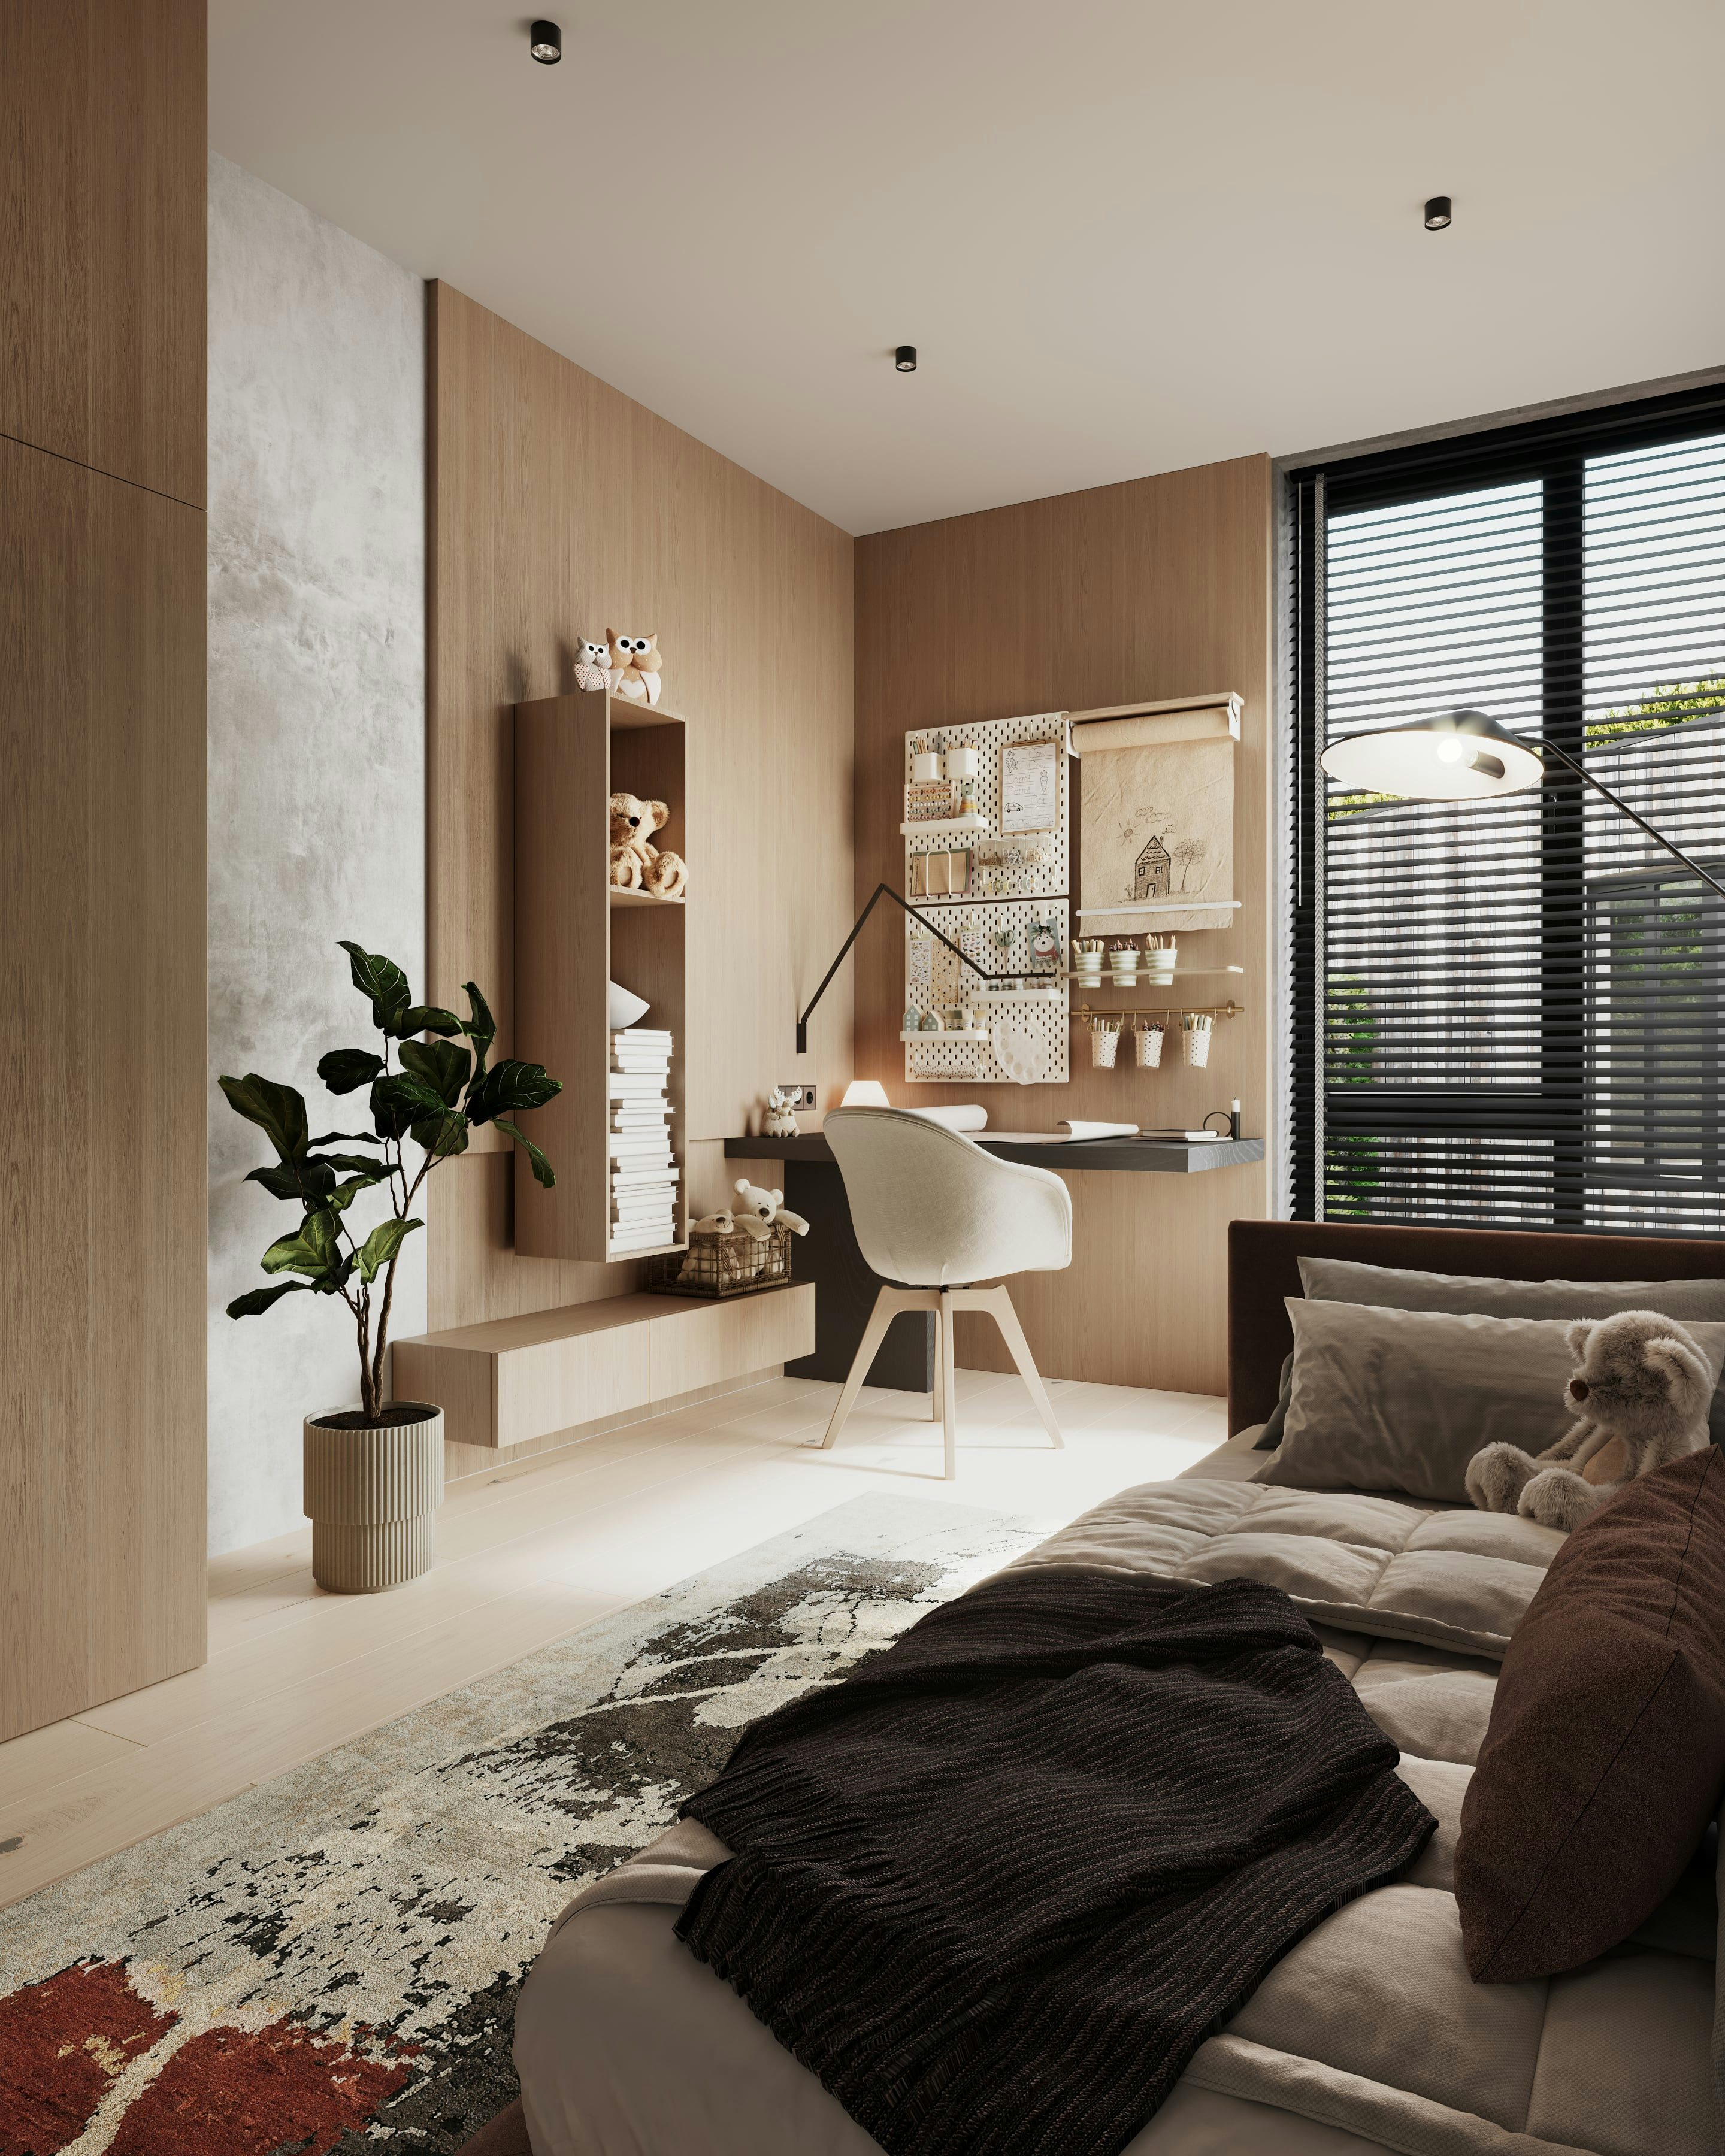 3D Architectural Visualization of kidsroom in private house Berlin, Germnay